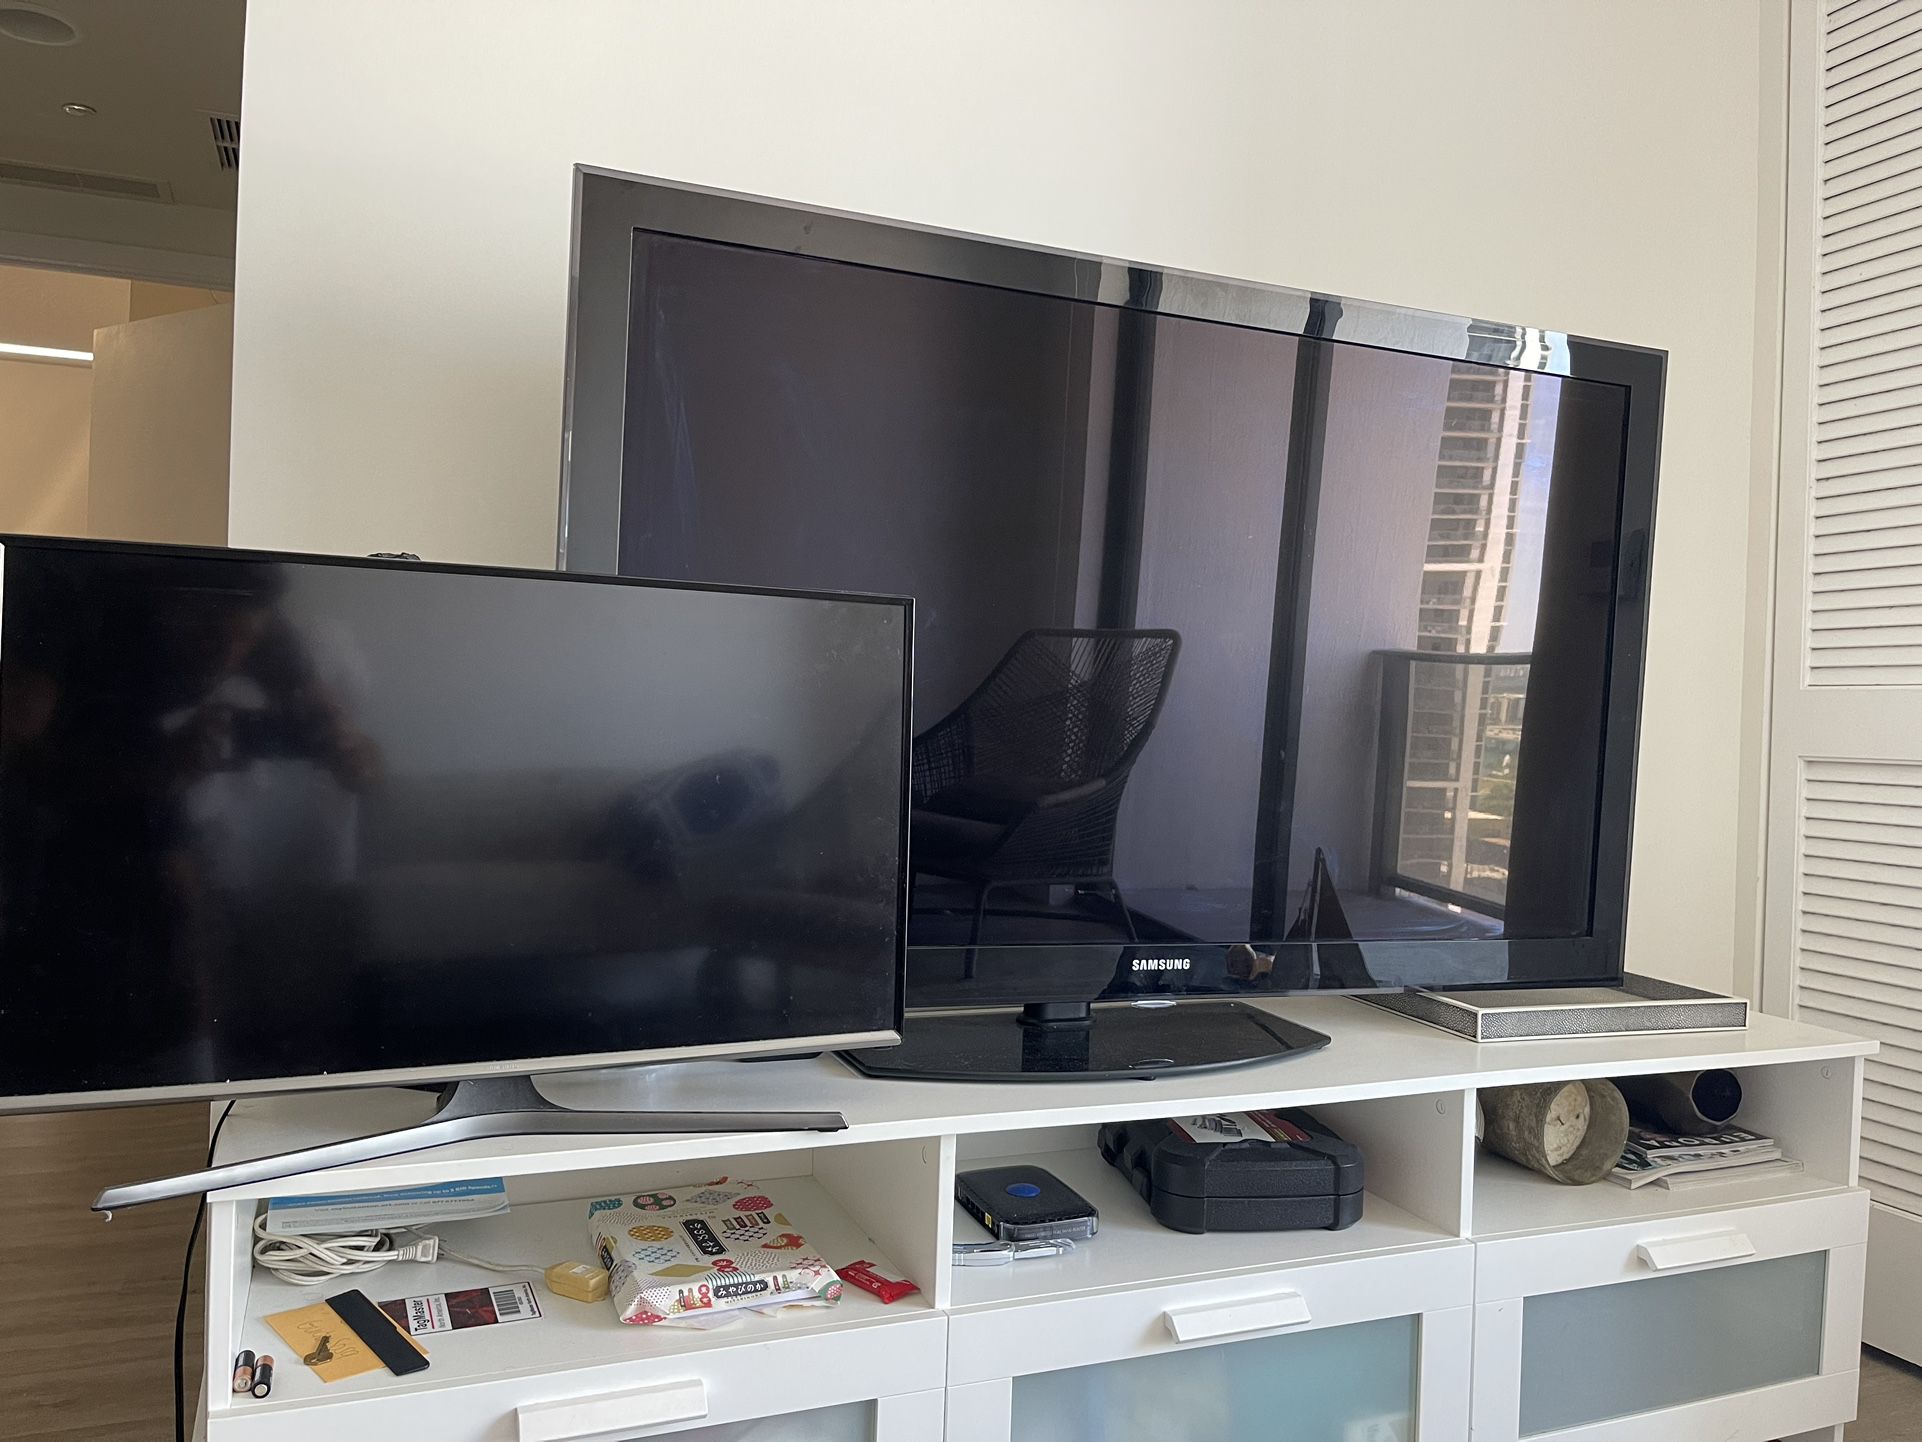 Samsung 55 Inch LED TV And Samsung 32 inch LED SMART TV